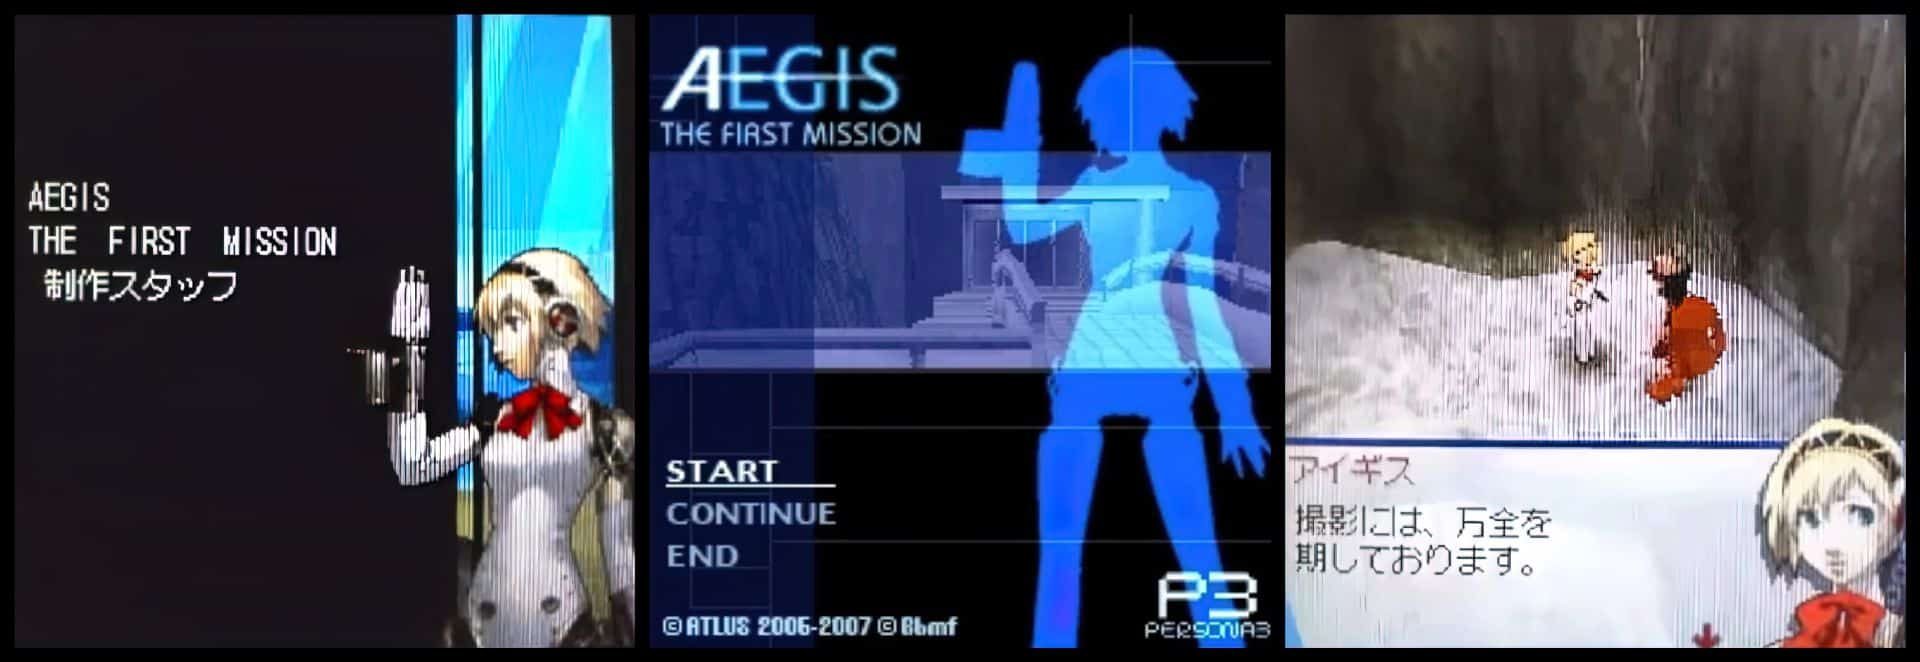 aegis-the-first-mission-9535074